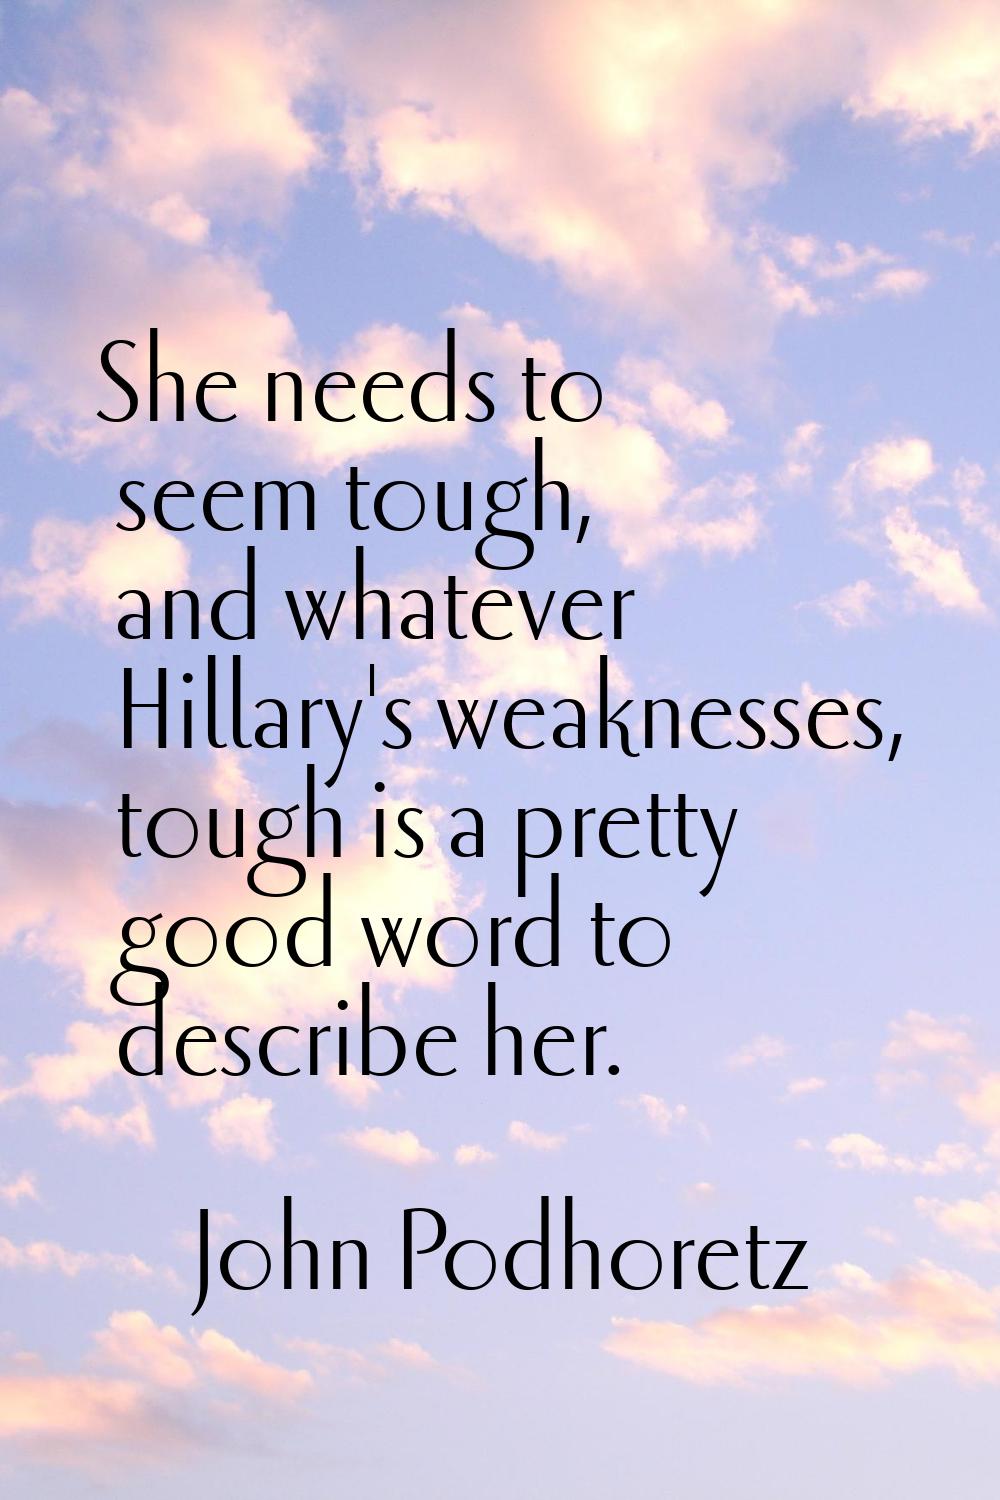 She needs to seem tough, and whatever Hillary's weaknesses, tough is a pretty good word to describe